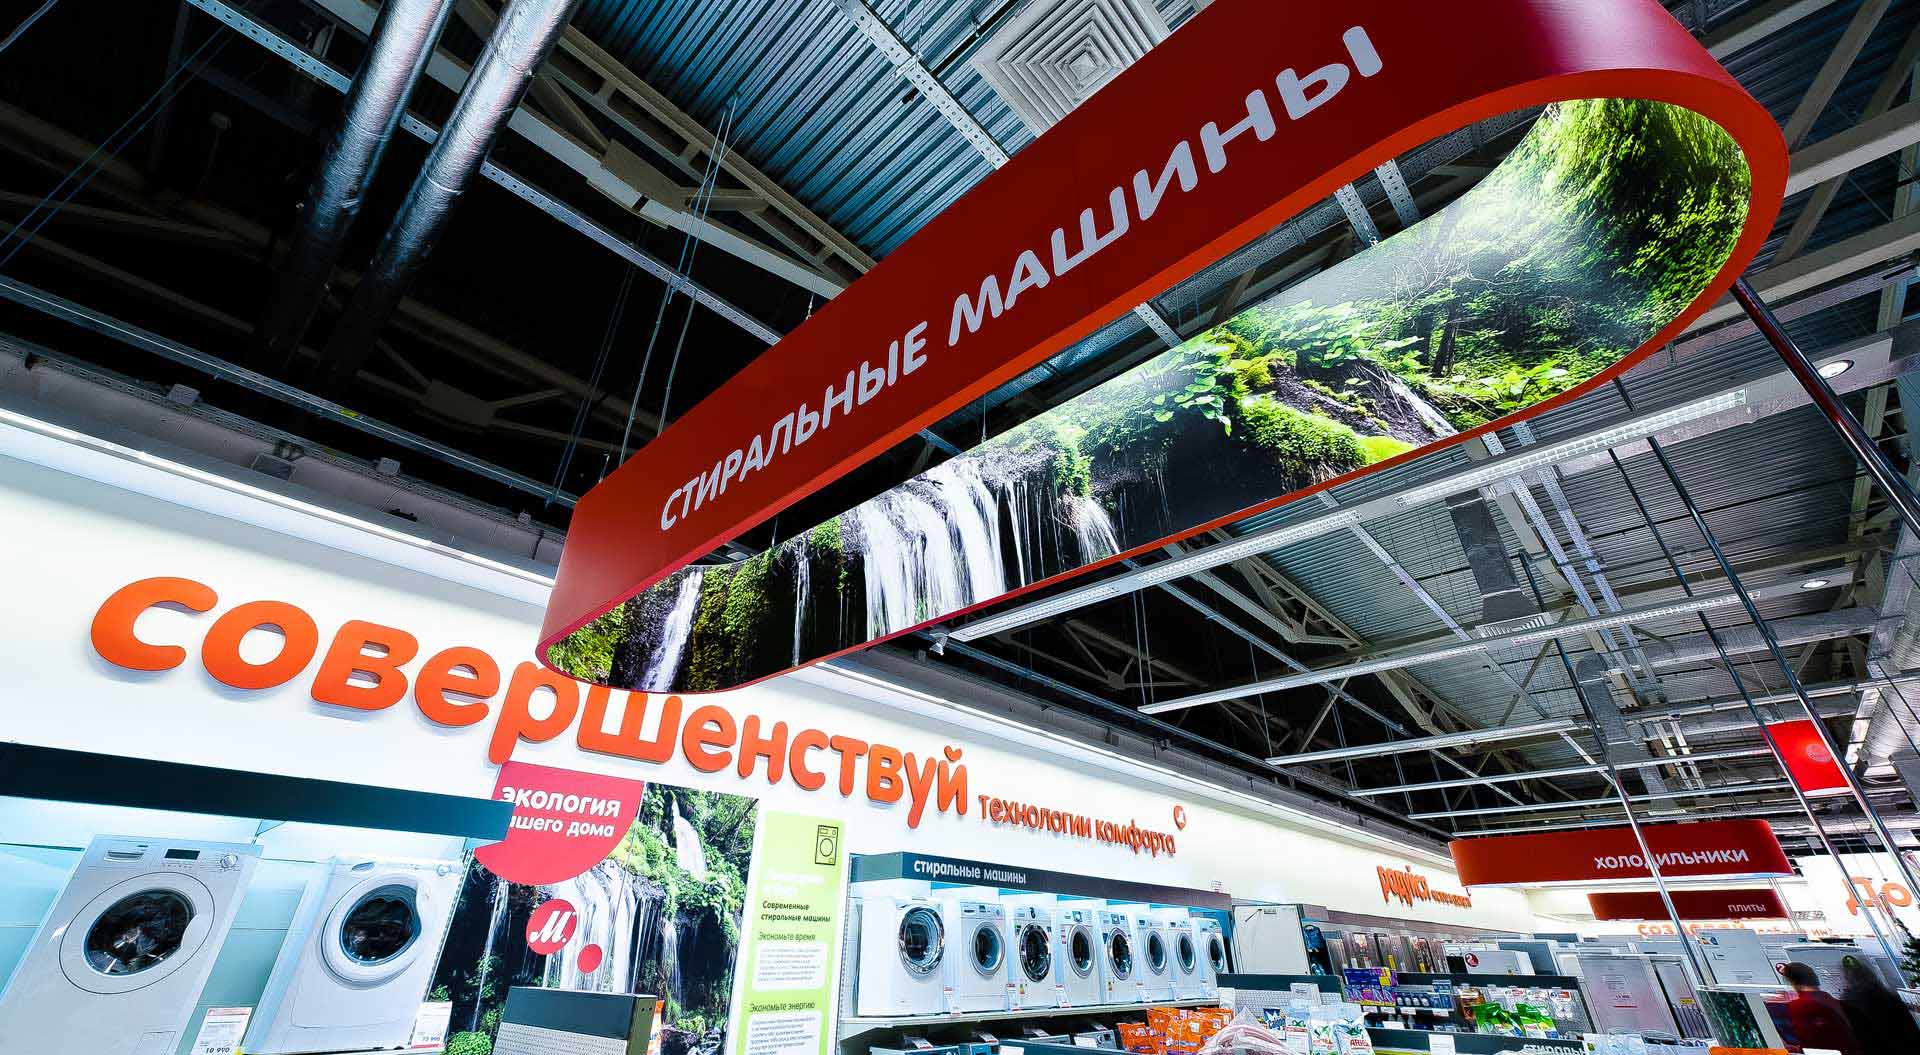 M.Video Russia retail interior store design, branding, household technology electrical homewares signage system